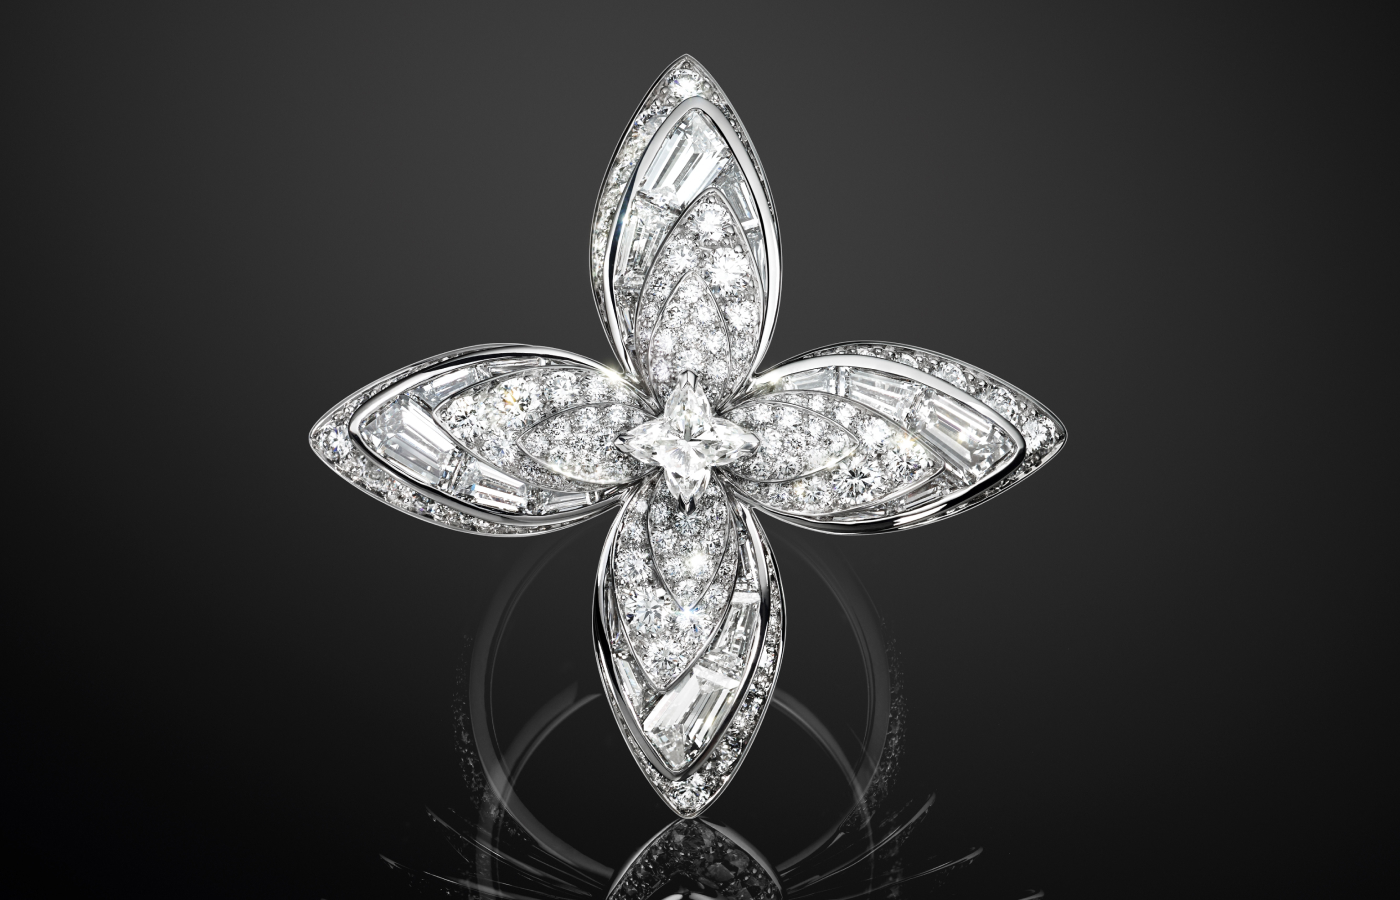 Louis Vuitton Deep Time Chapter II high jewellery ring in white gold and diamond featuring a custom cut LV logo diamond